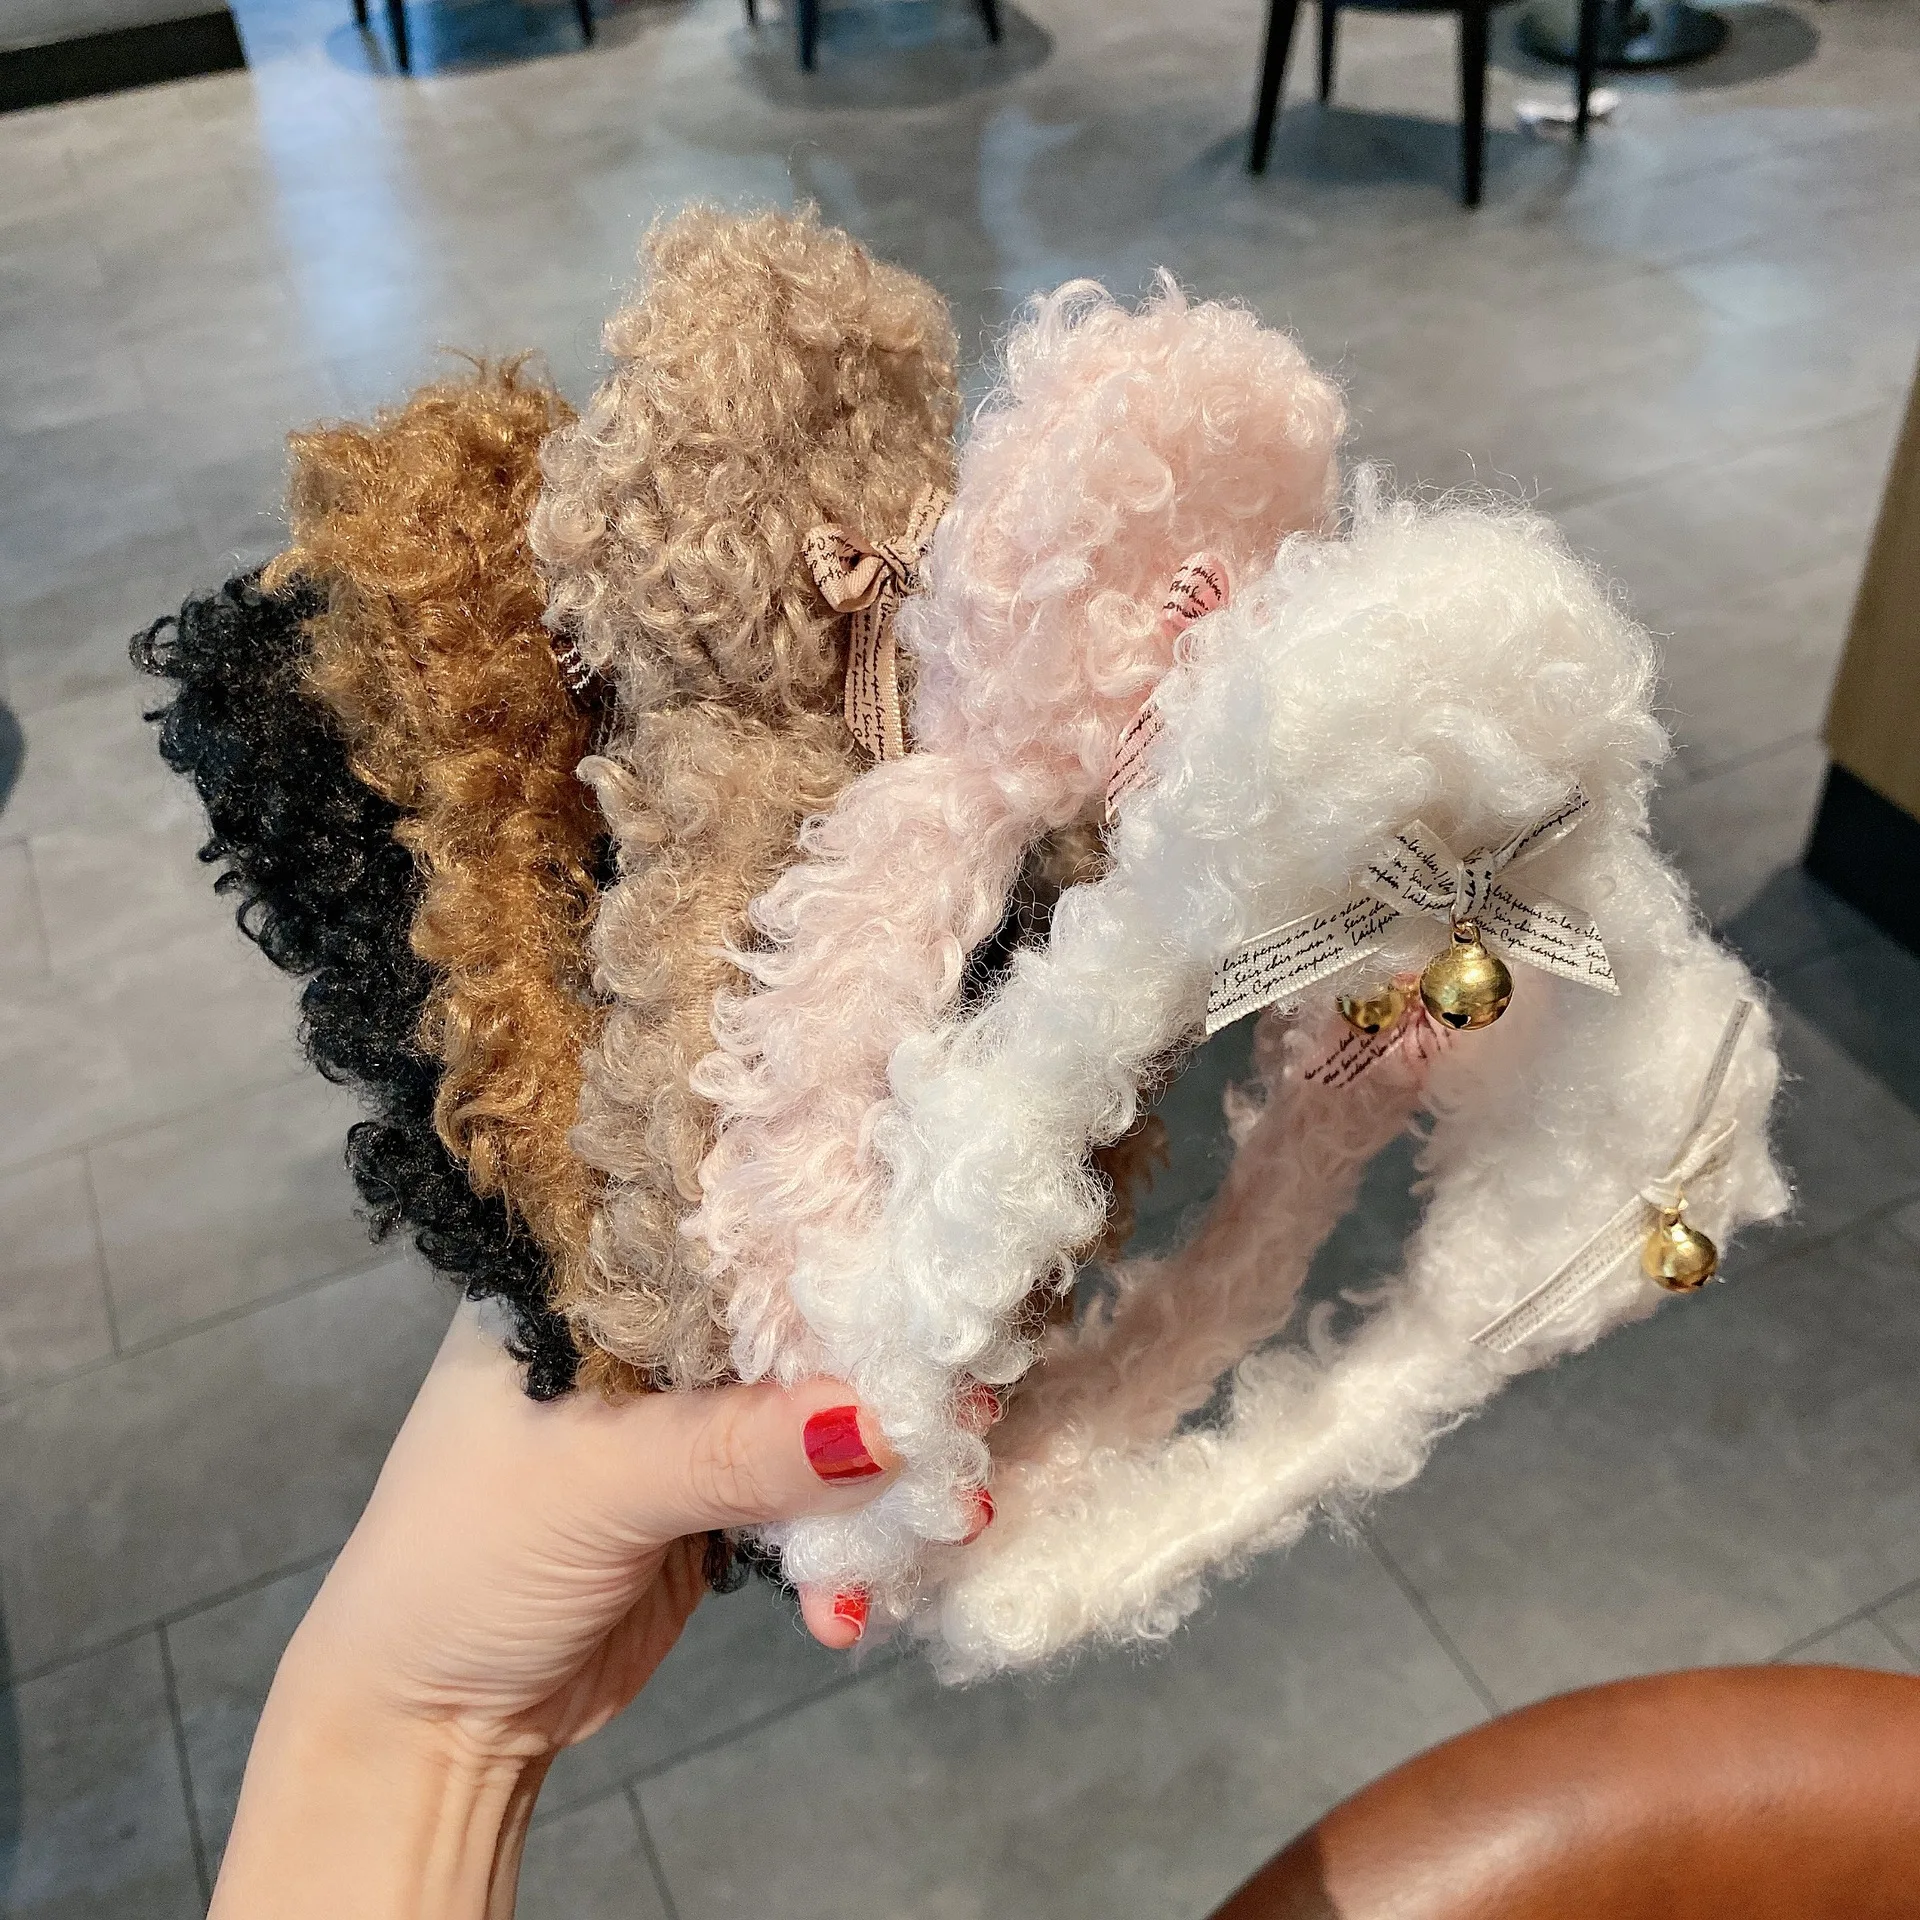 2021 New Korea Bear Ear Bell With Bow Knot Fur Hairband Cute Plush  Headband Hair Hoop Accessories For Women Girls 2021 new arrivals ponytail holders banana hairpins solid plastic hair clips for women tins banana clip strong bite force 2 pcs